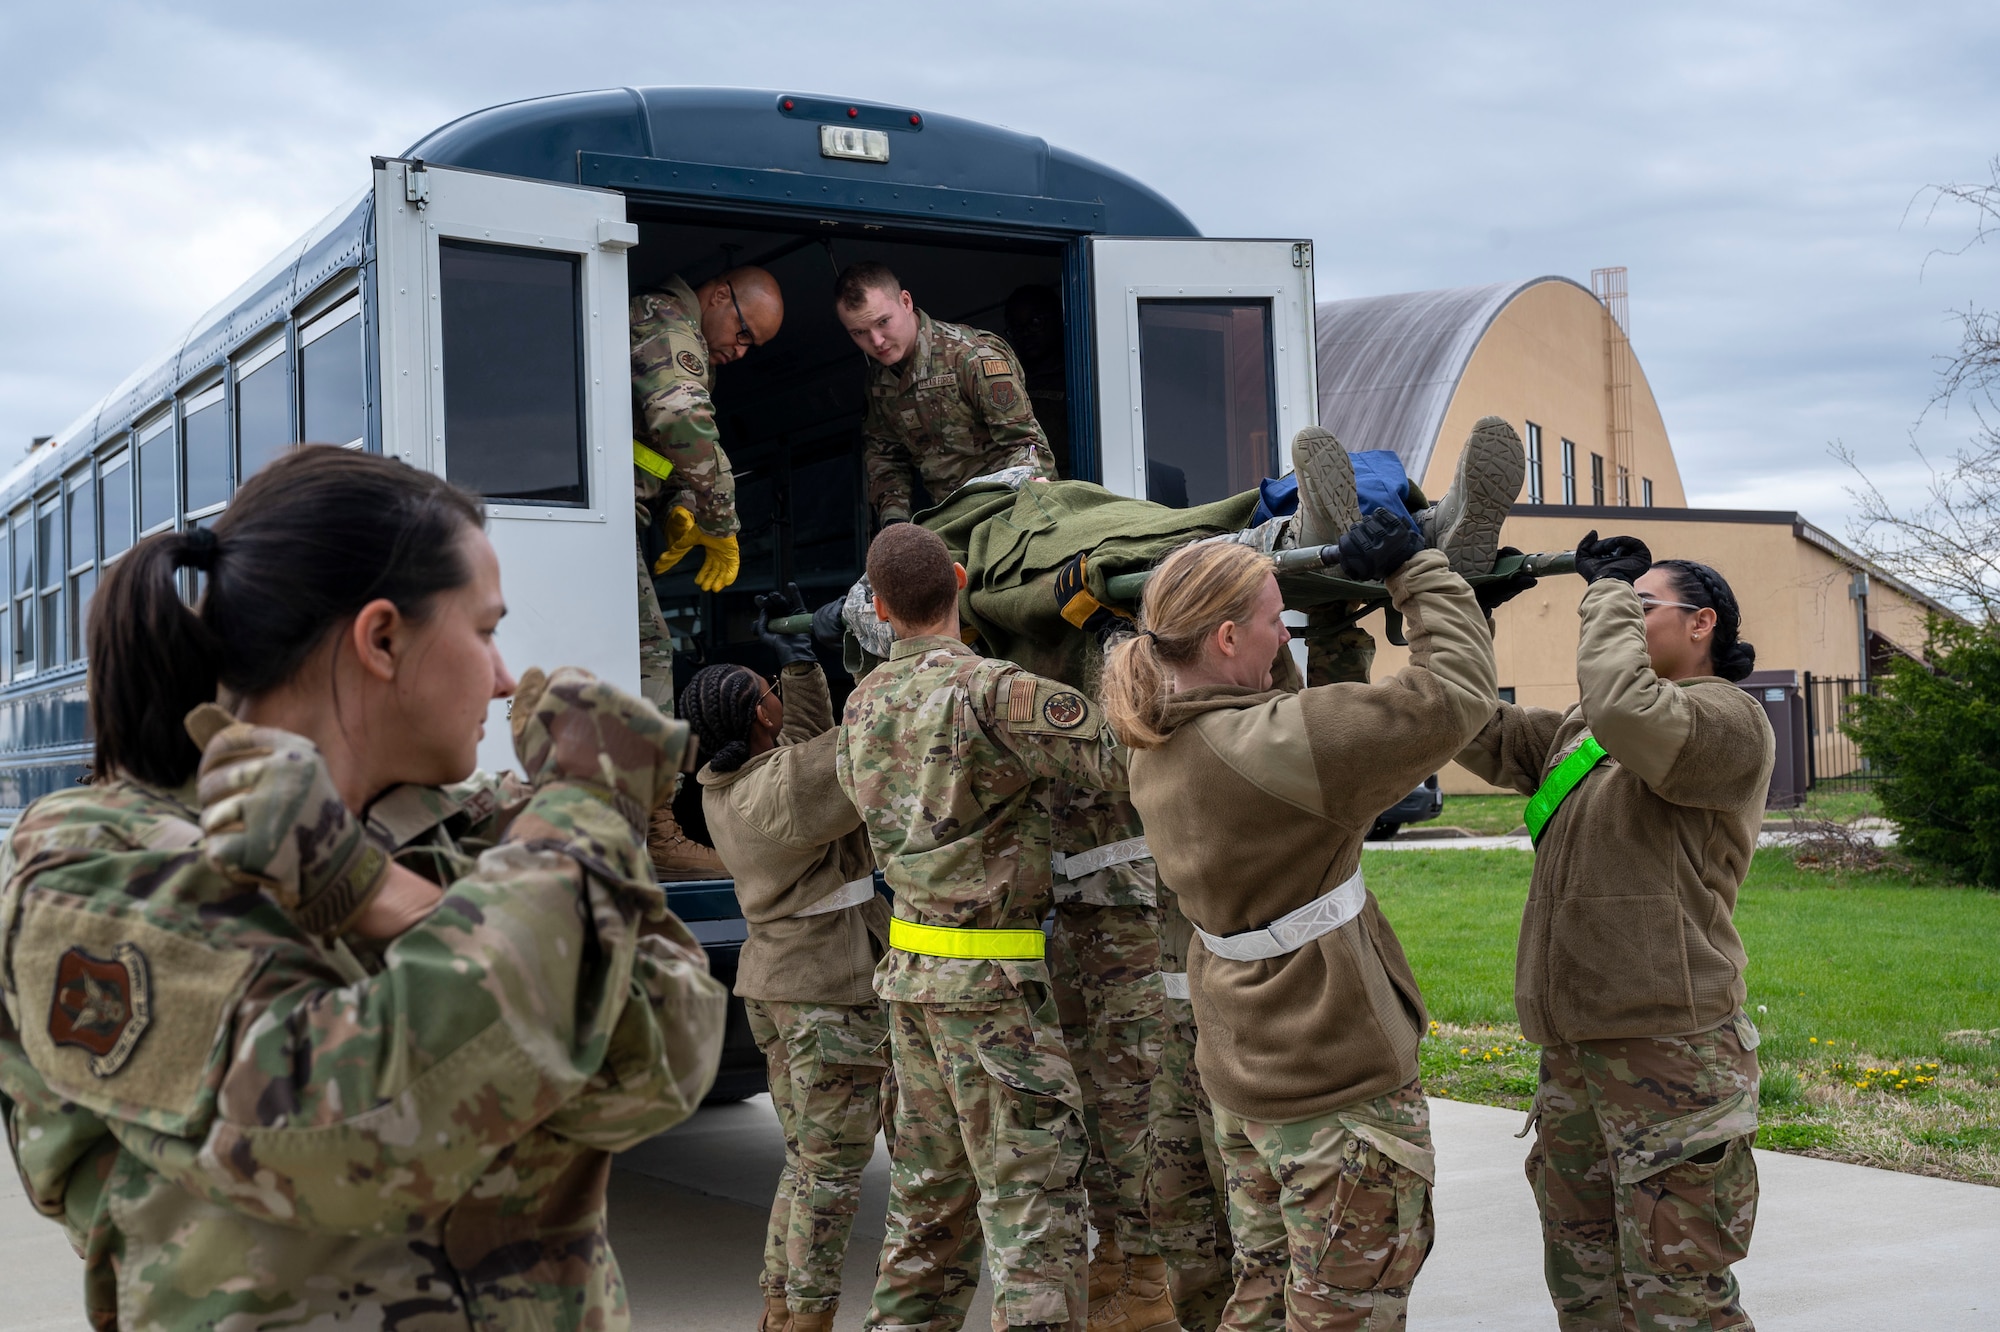 Airmen from the 932nd Aeromedical Evacuation Squadron and the 932nd Aeromedical Staging Squadron help load a patient onto a bus during the Spartan Reserve exercise at Scott Air Force Base, Illinois on April 7, 2024. The Spartan Reserve Phase II exercise aims to prepare airmen for complexities of modern warfare through recreating the challenges in a deployed environment. (U.S. Air Force Photo by Tech. Sgt. Kari Siltz)